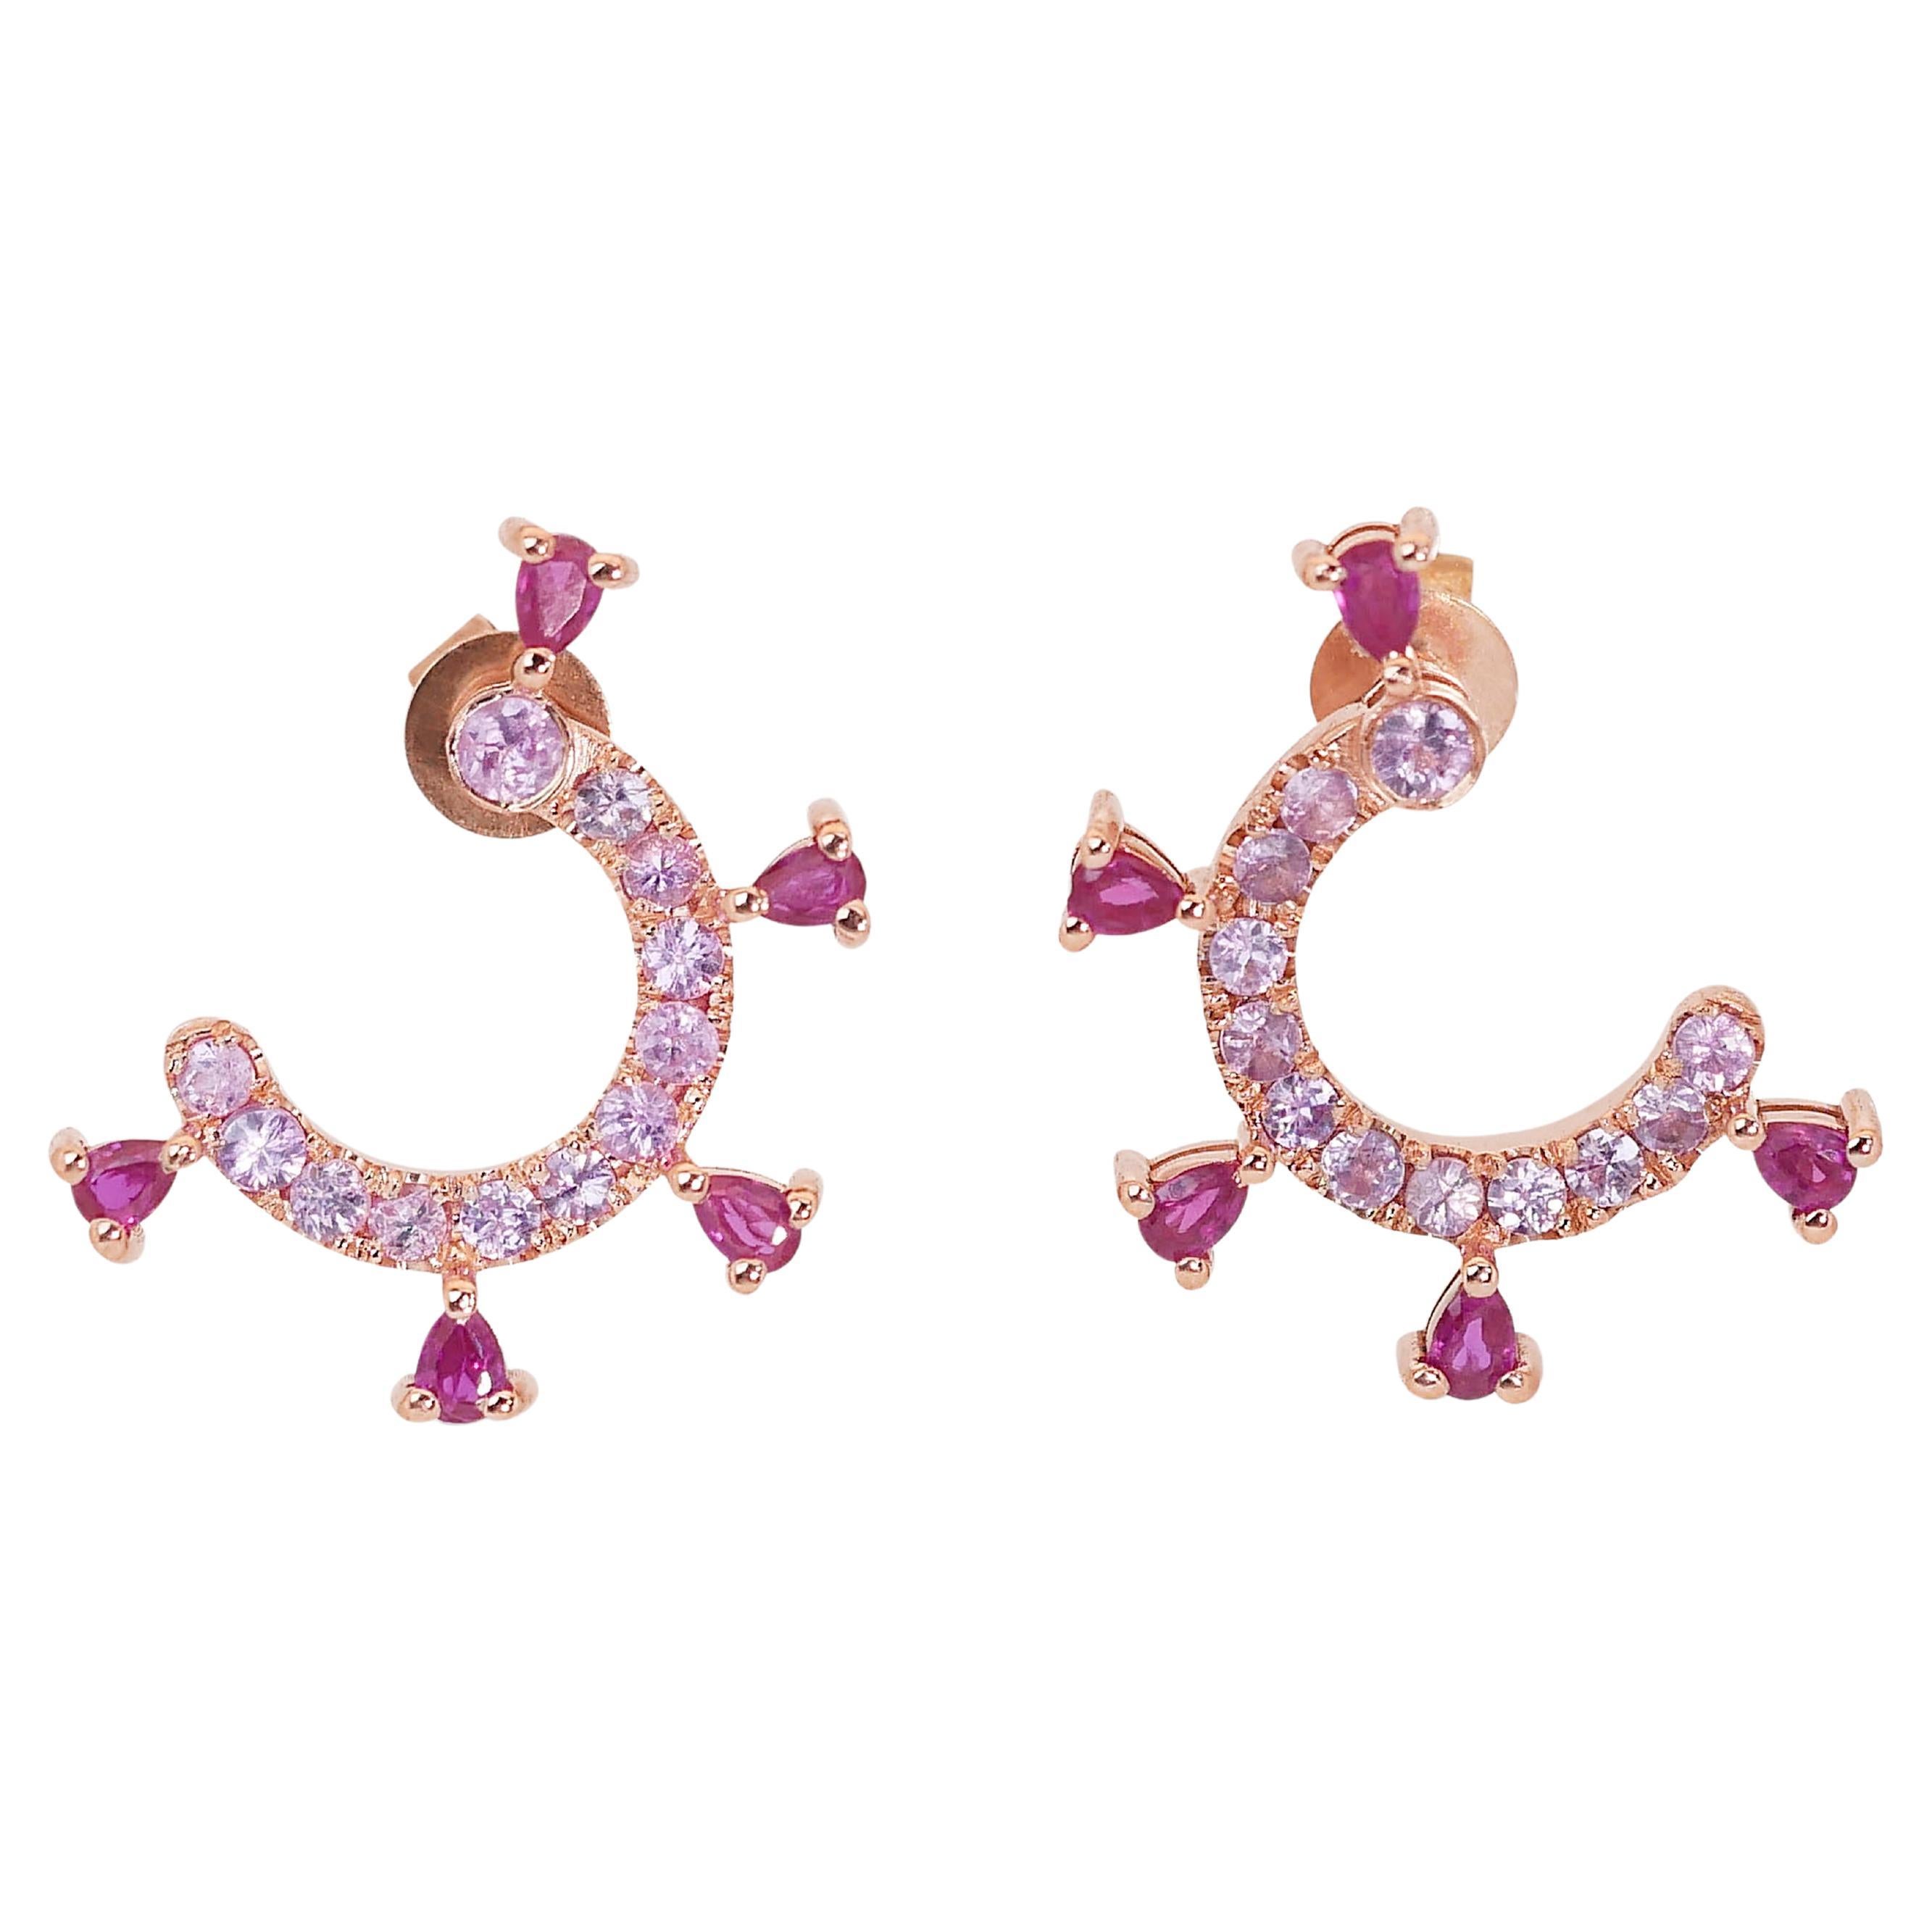 One of a kind Rubies and Sapphires earrings with 1.88 carat 

Embrace the regal beauty of these exquisite hoop earrings and let your style shine. Accompanied by an AIG certification, these earrings offer not only unparalleled beauty but also the